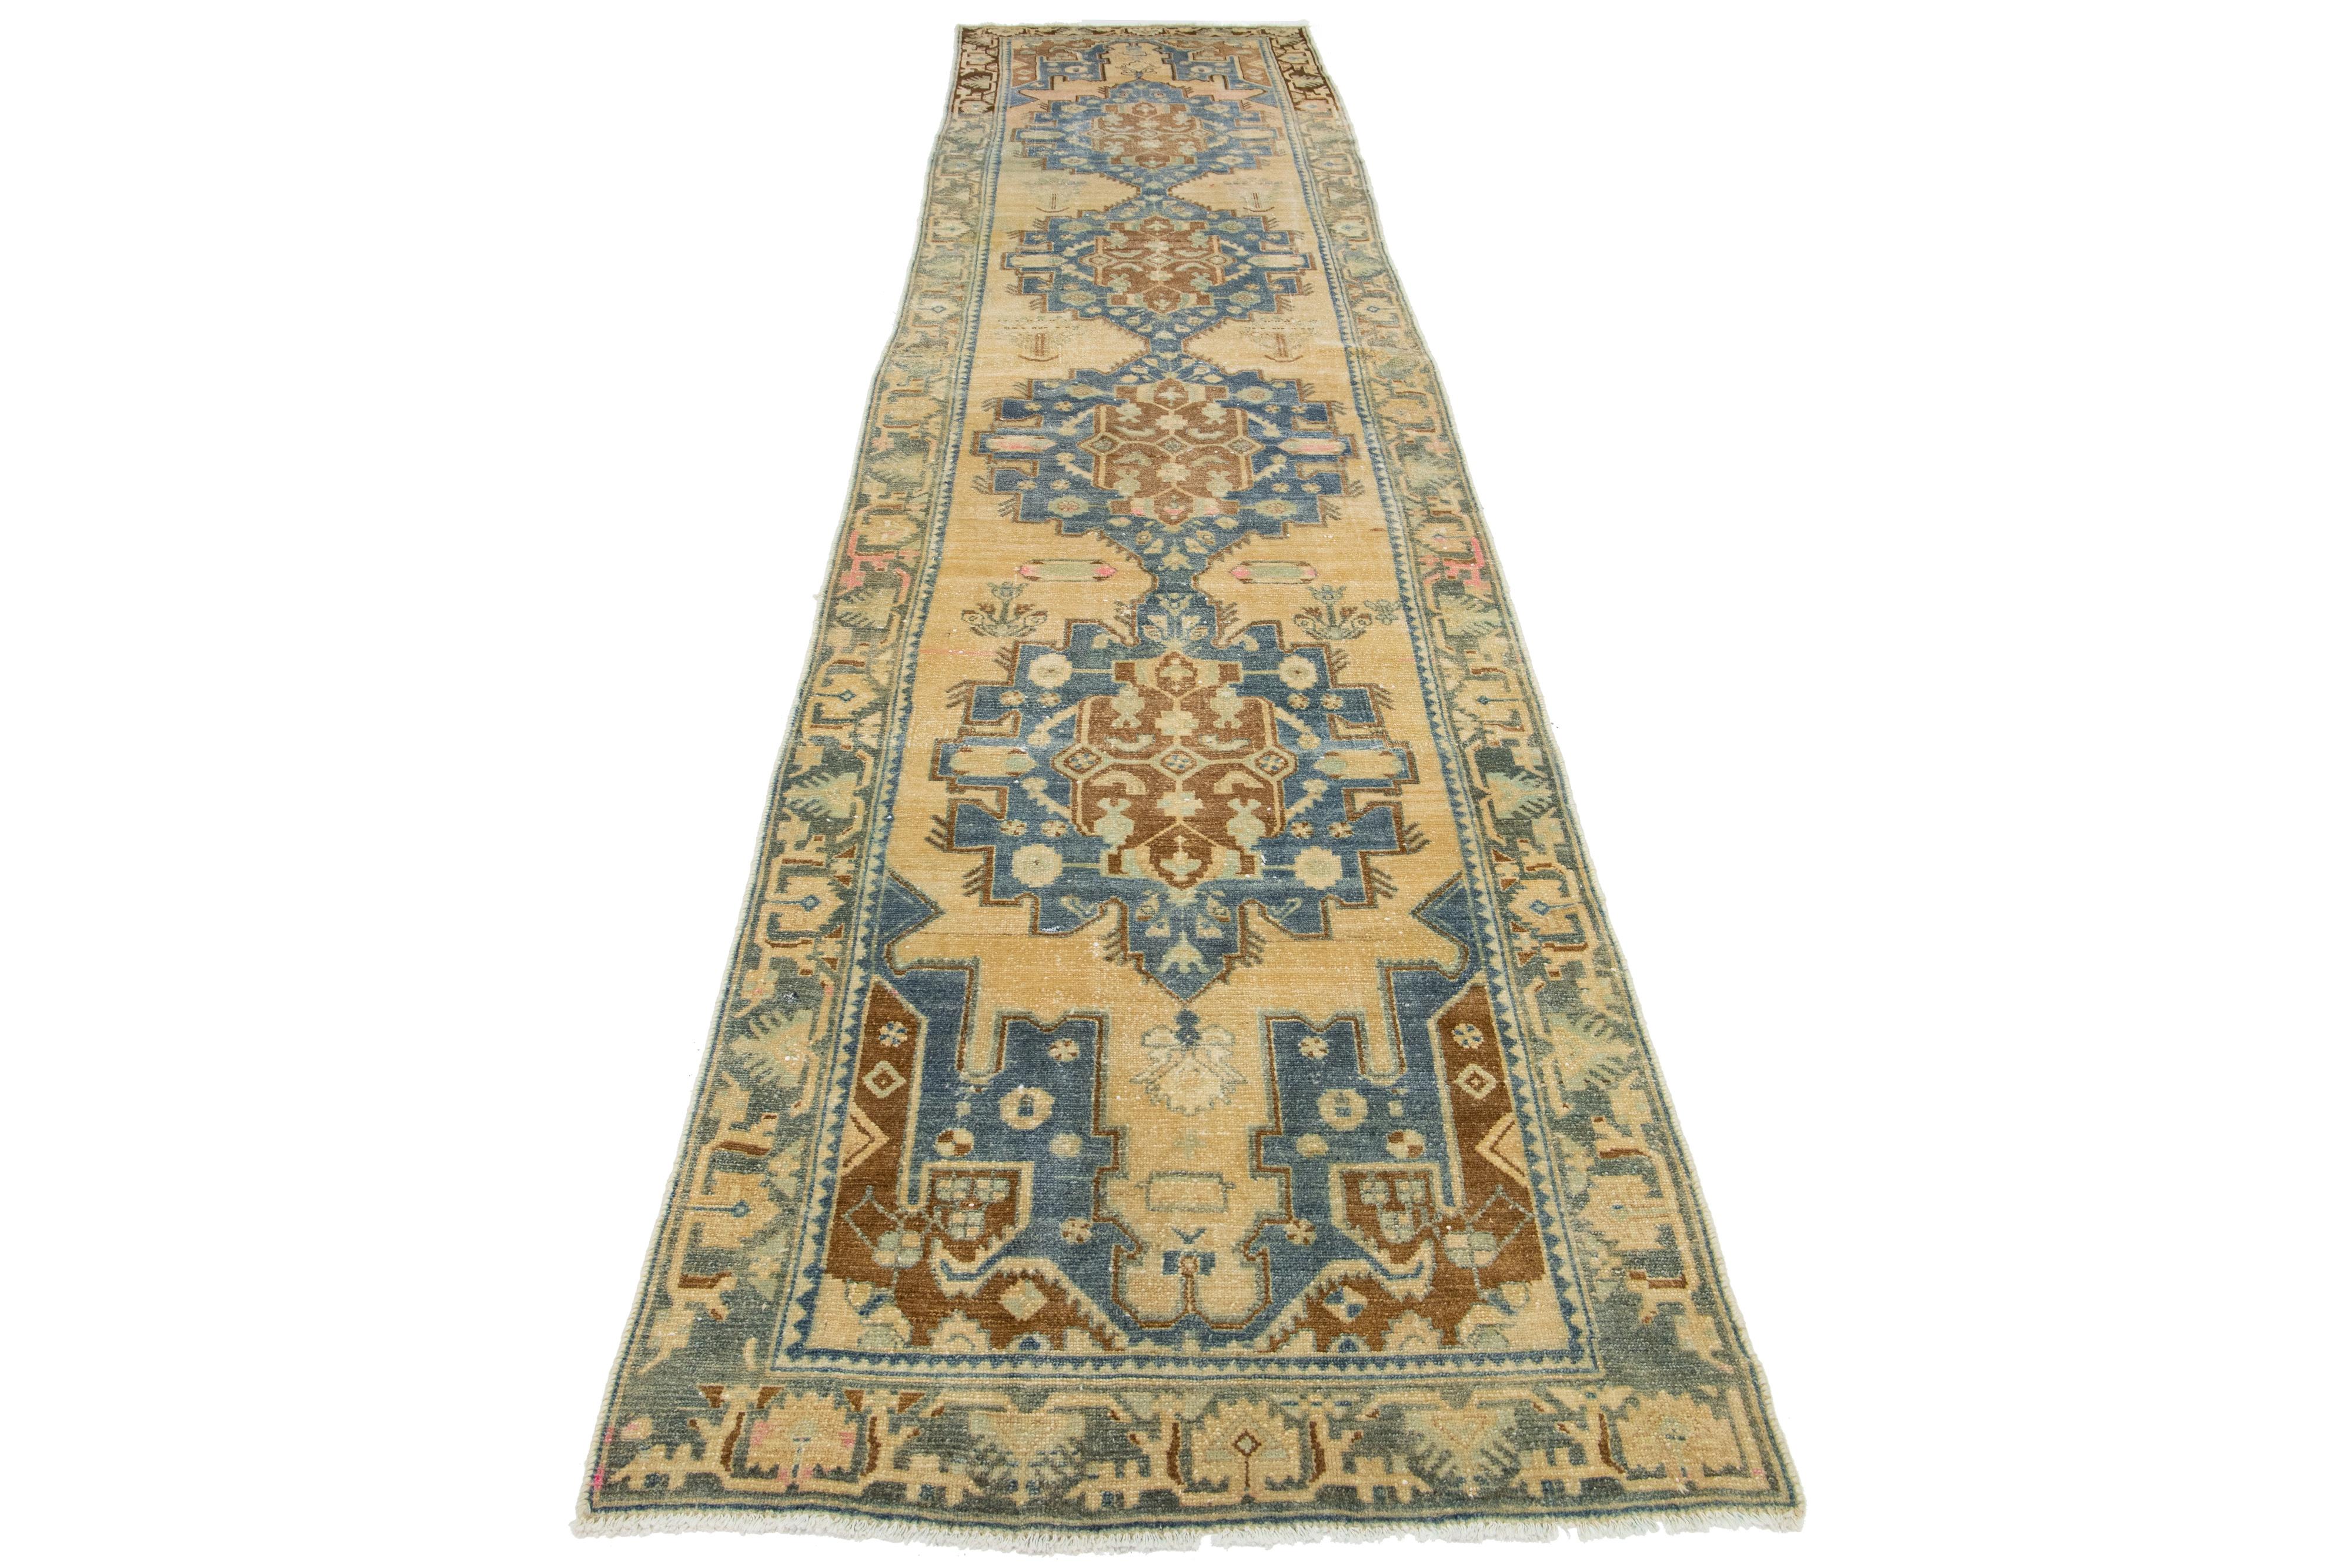 This beautiful 20th-century Heriz hand-knotted wool runner has a light brown color field. This Piece has blue and pink accents in a gorgeous tribal design.

This rug measures 3'5